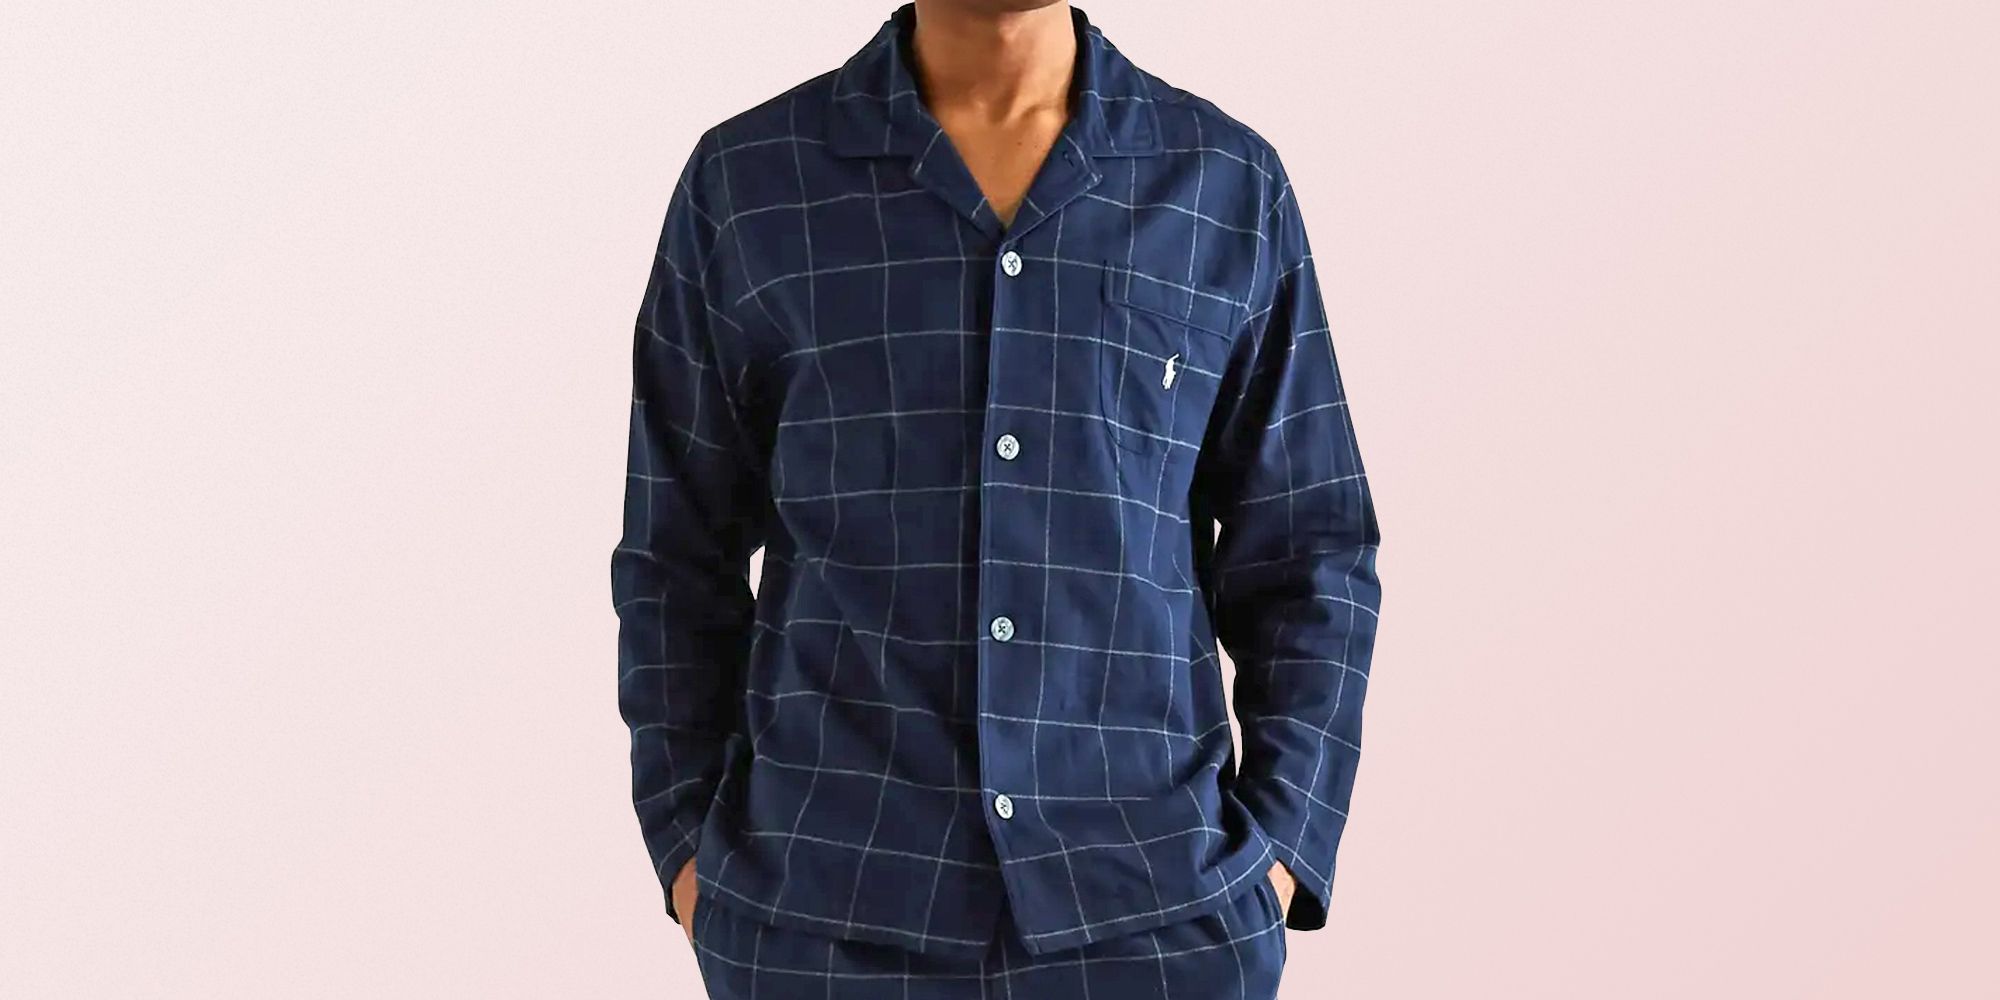 The Swankiest PJs for Men That Are Way More Stylish